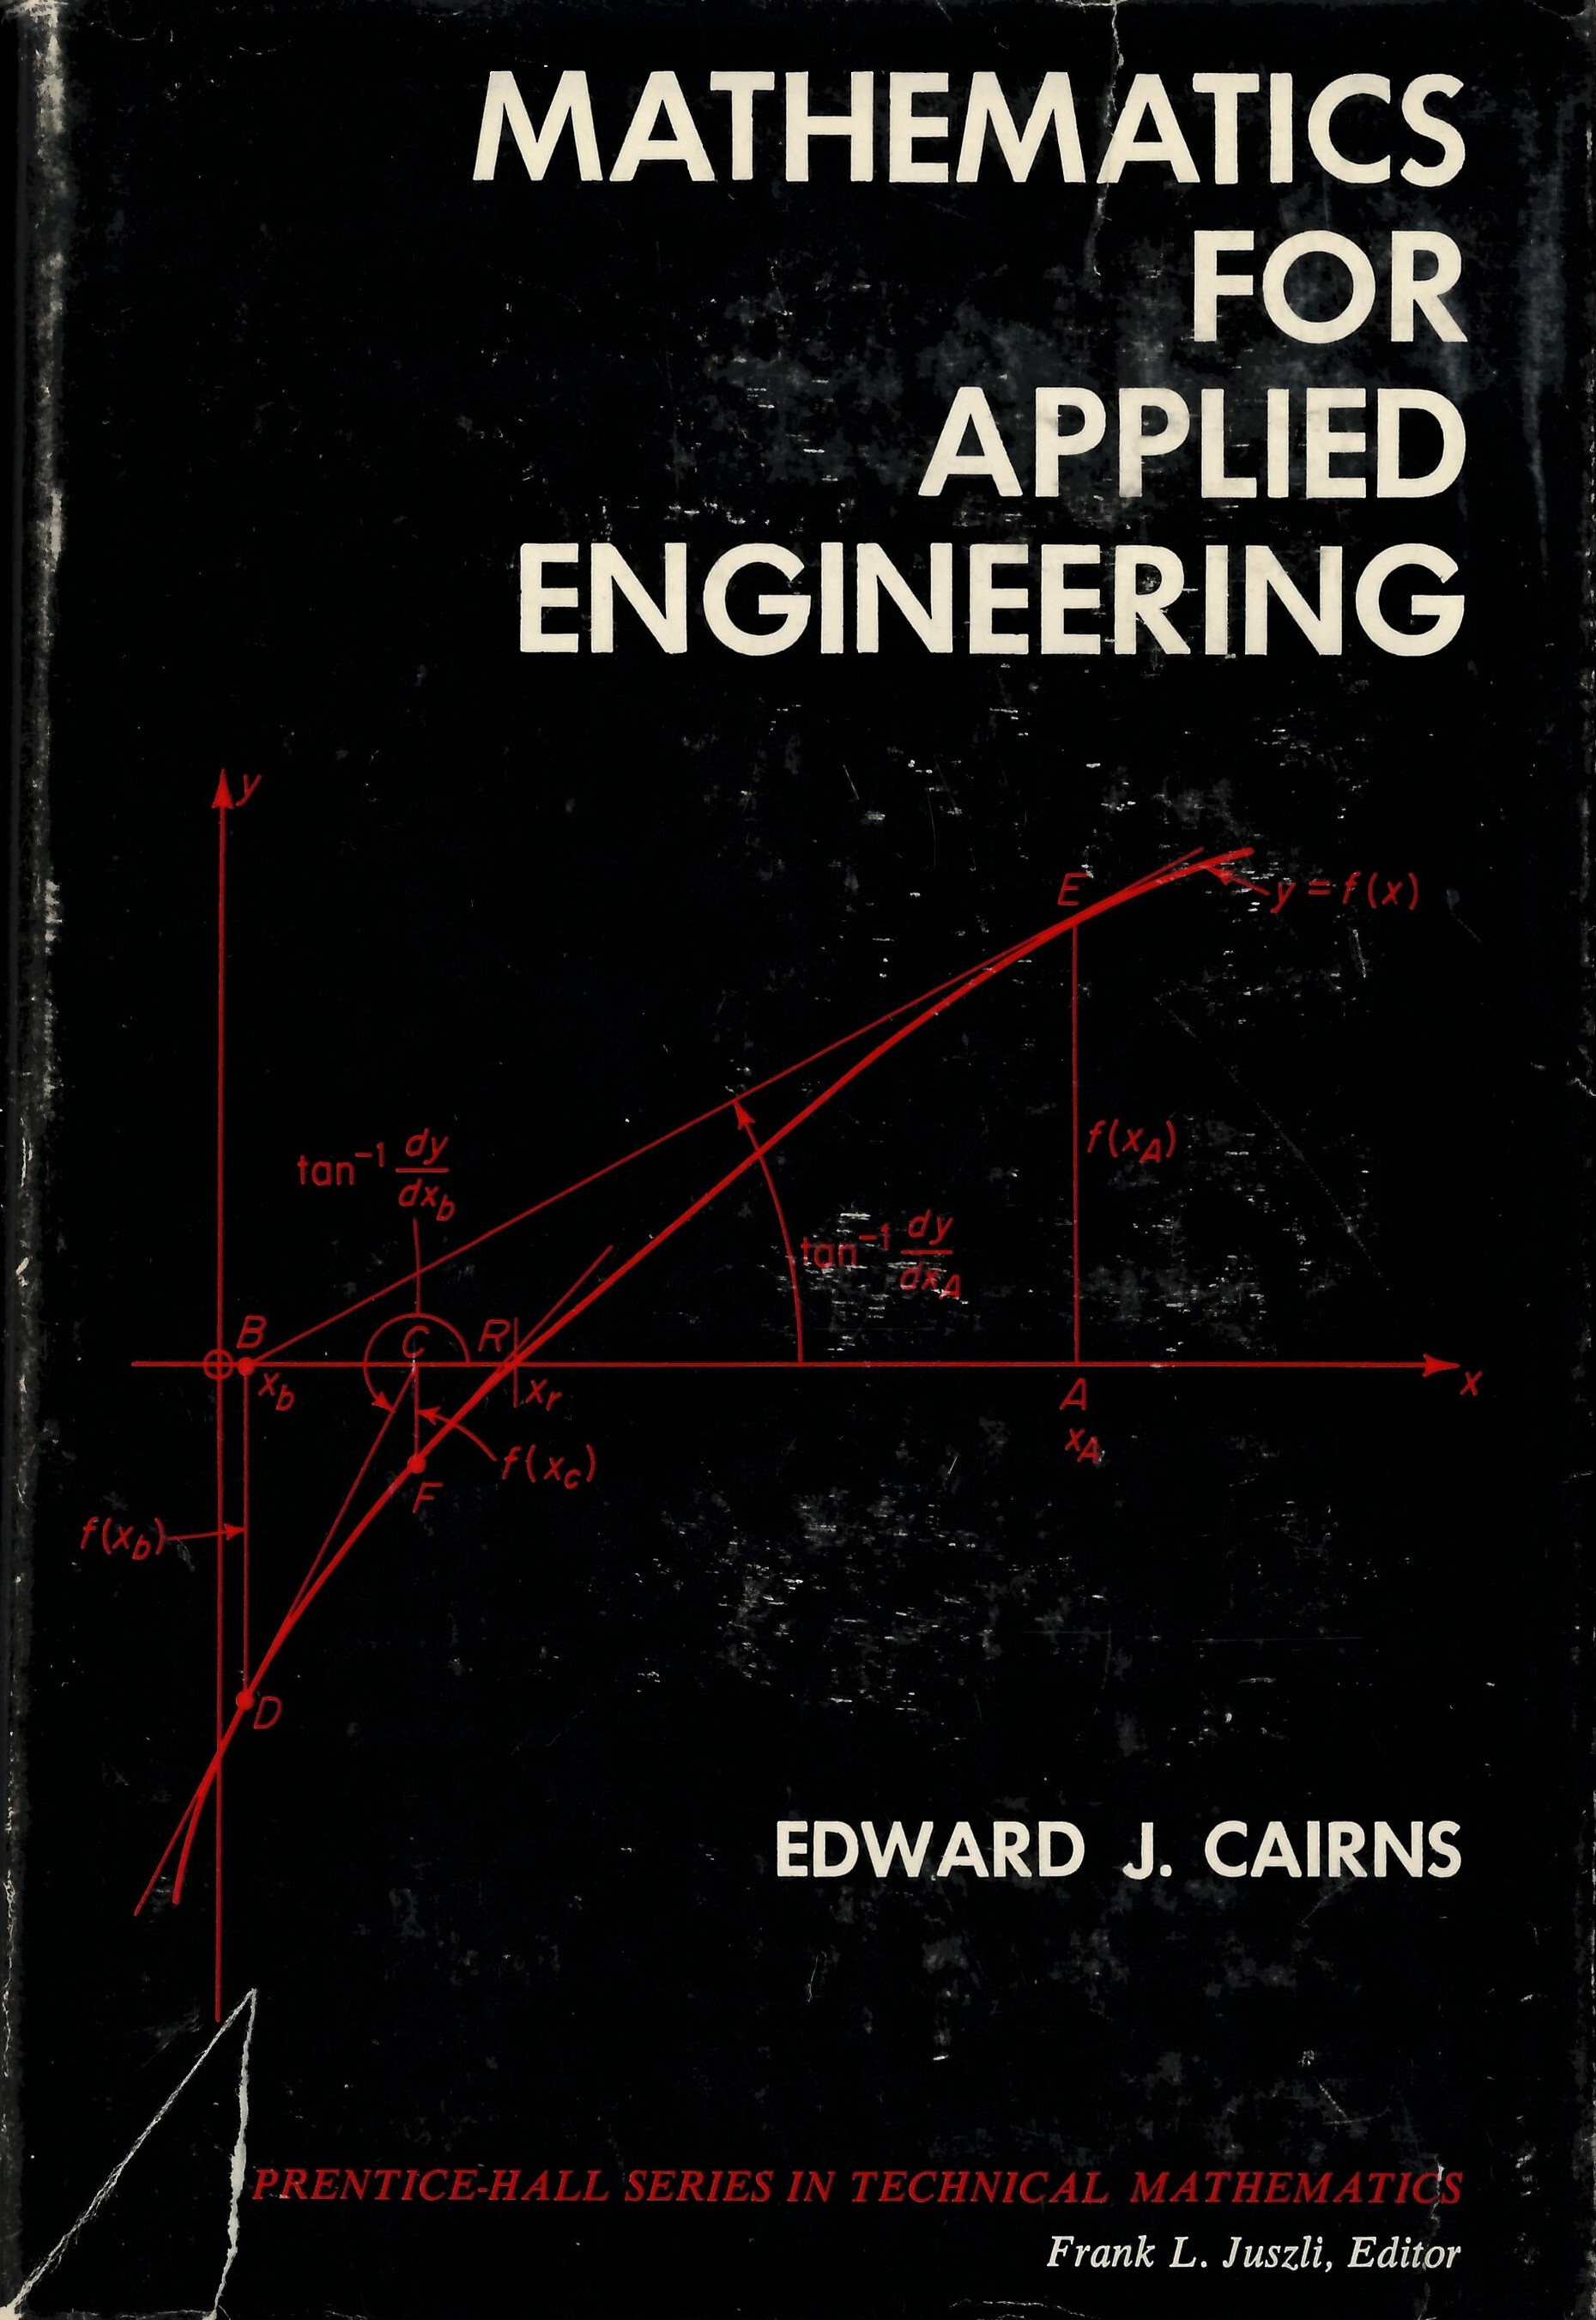 Mathematics for applied engineering